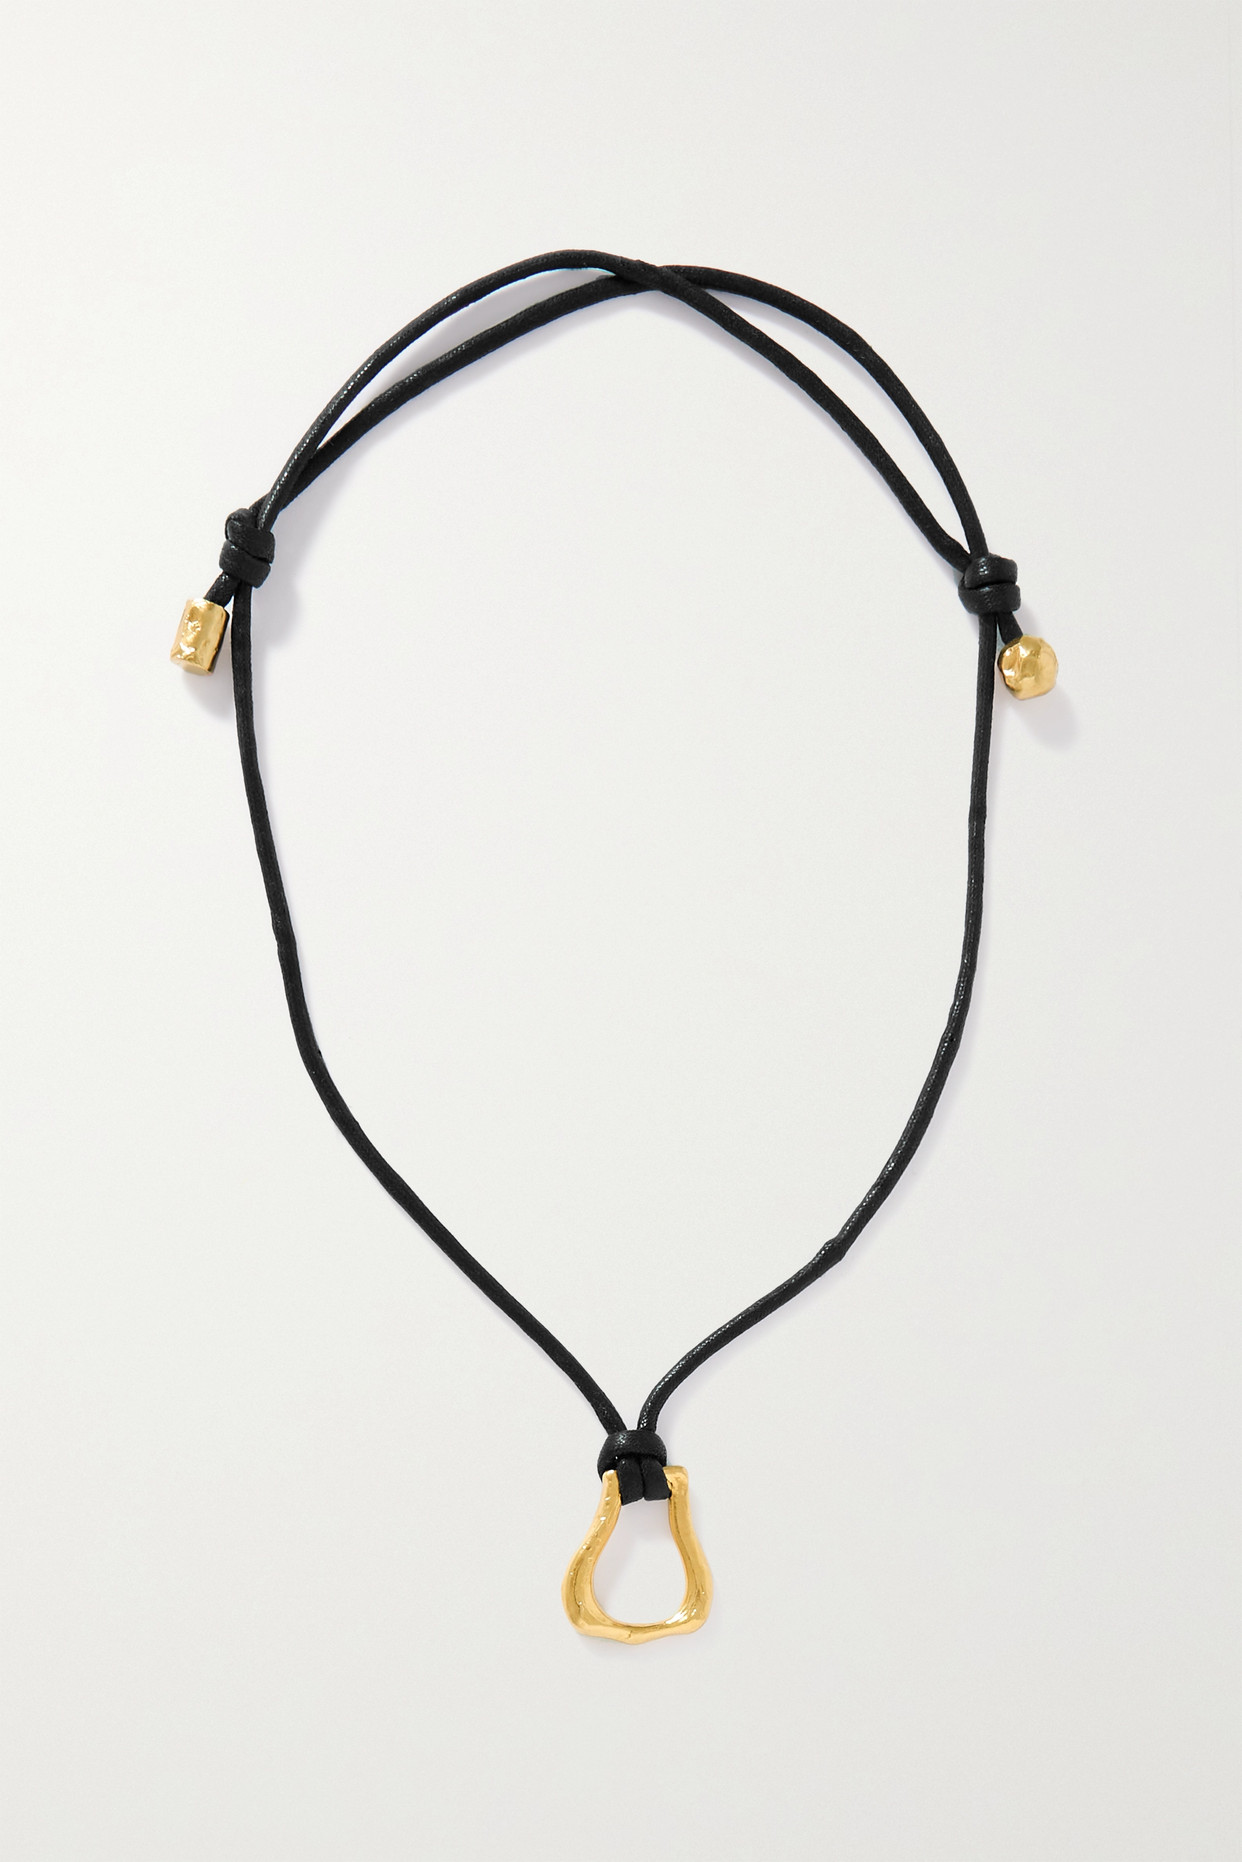 The Link of Wanderlust Recycled Gold-Plated Cord Necklace